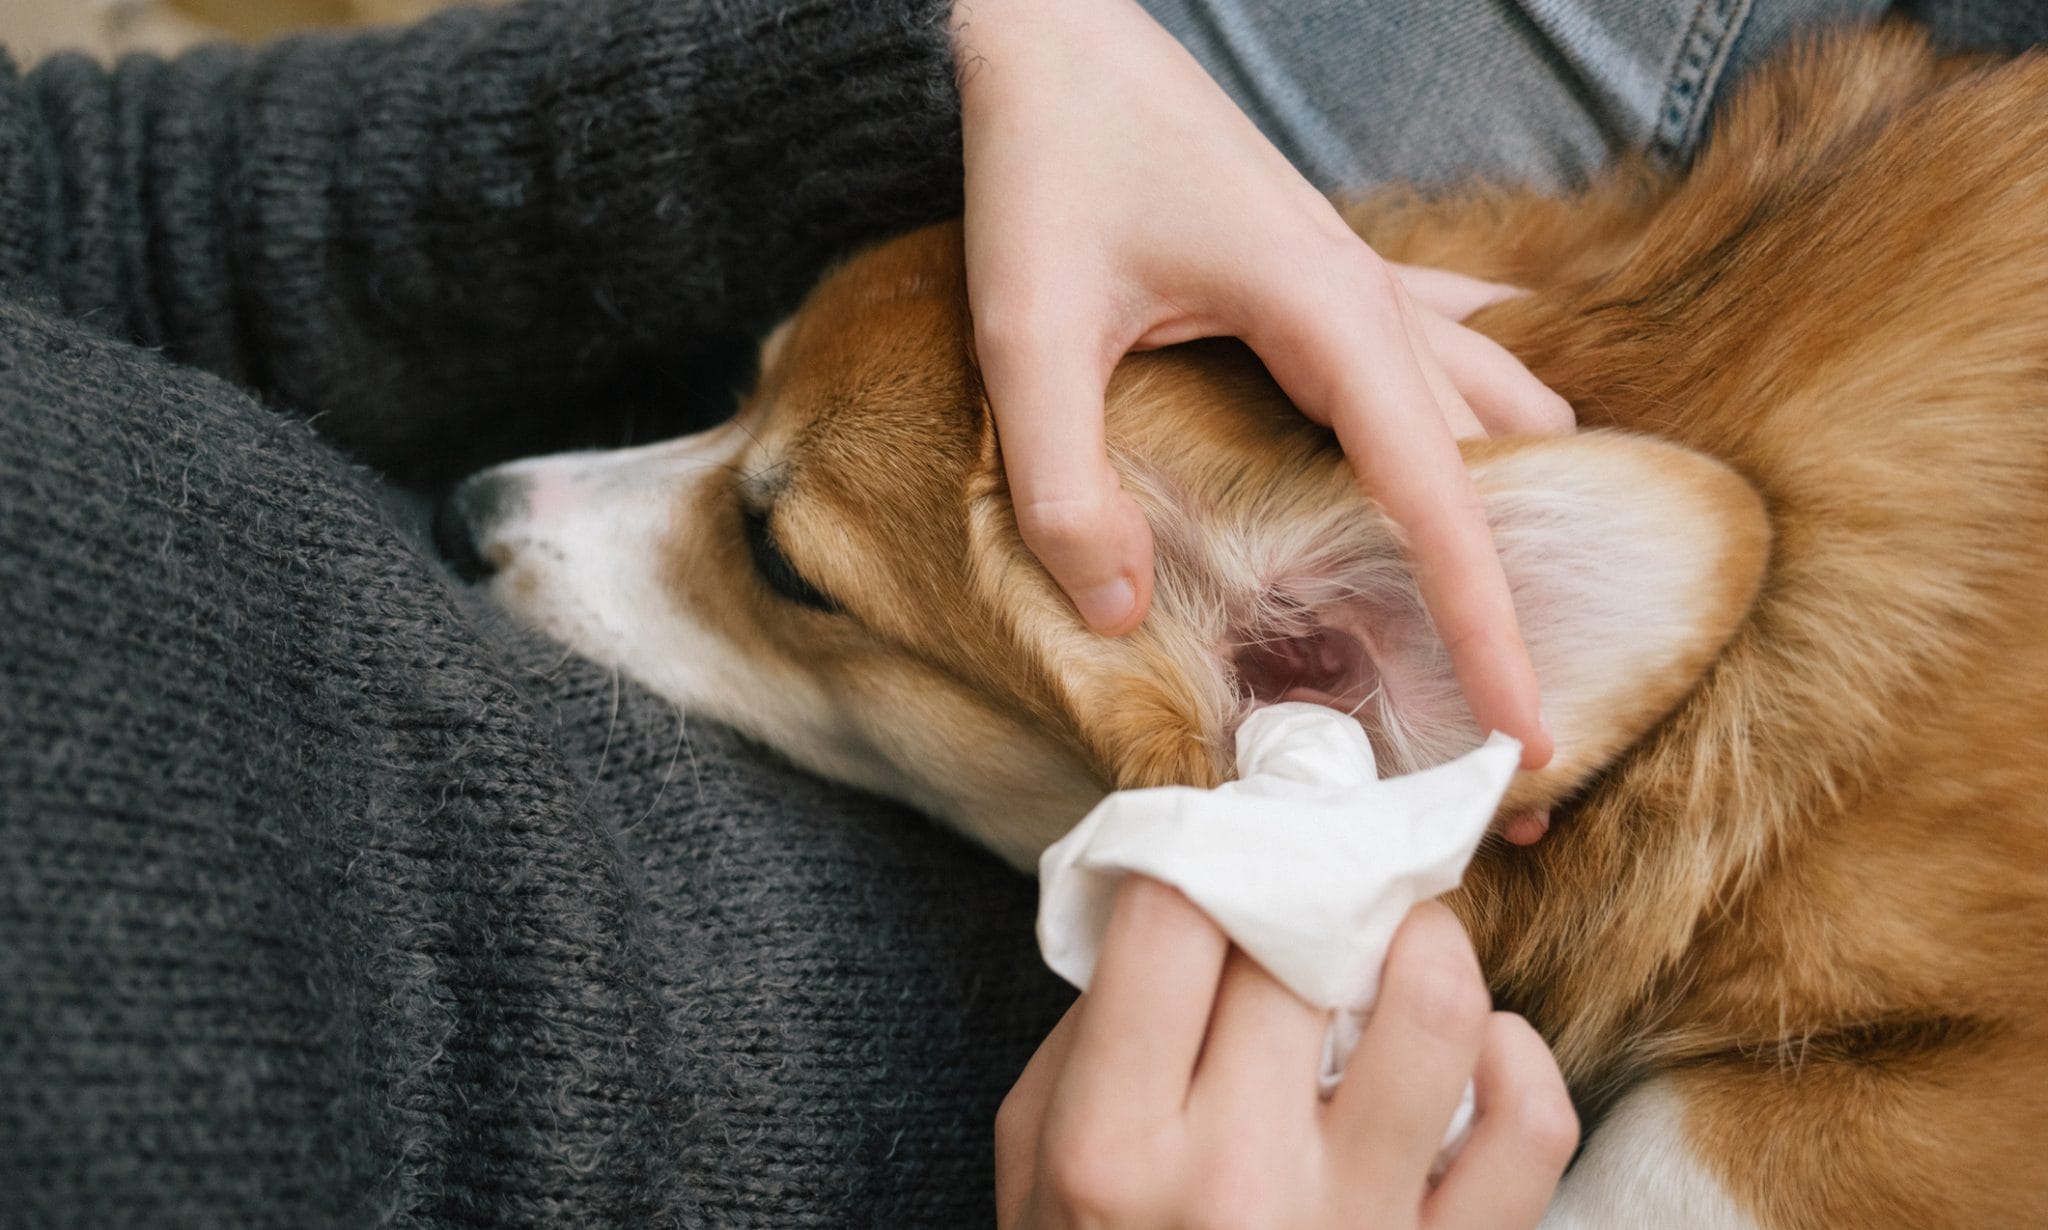 how-to-clean-your-dog-s-ears-at-home-8-easy-tips-bechewy